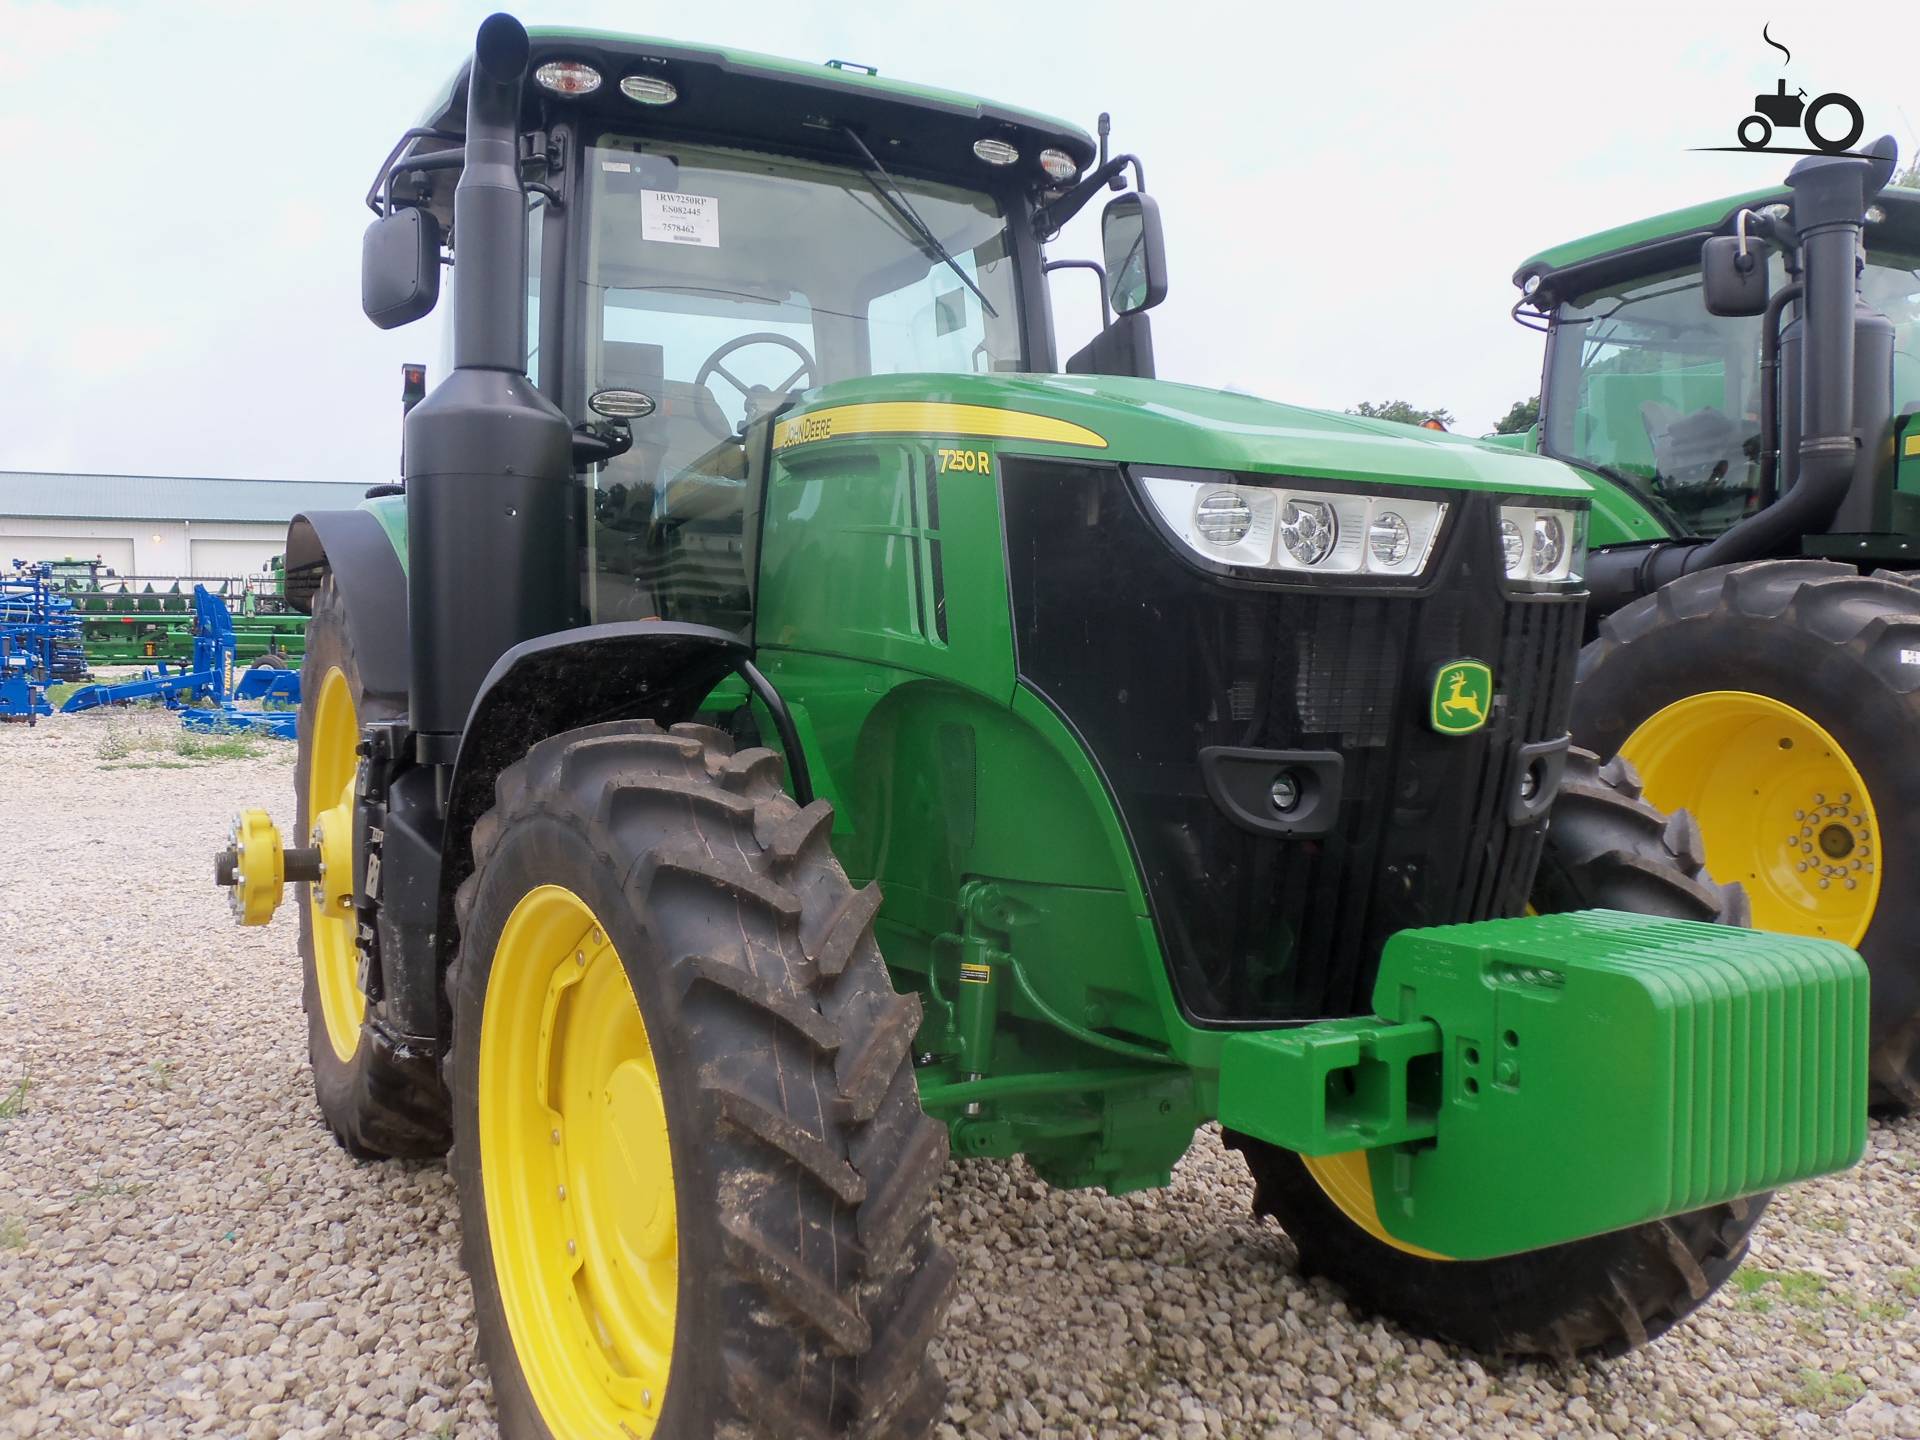 Tractor 7250R